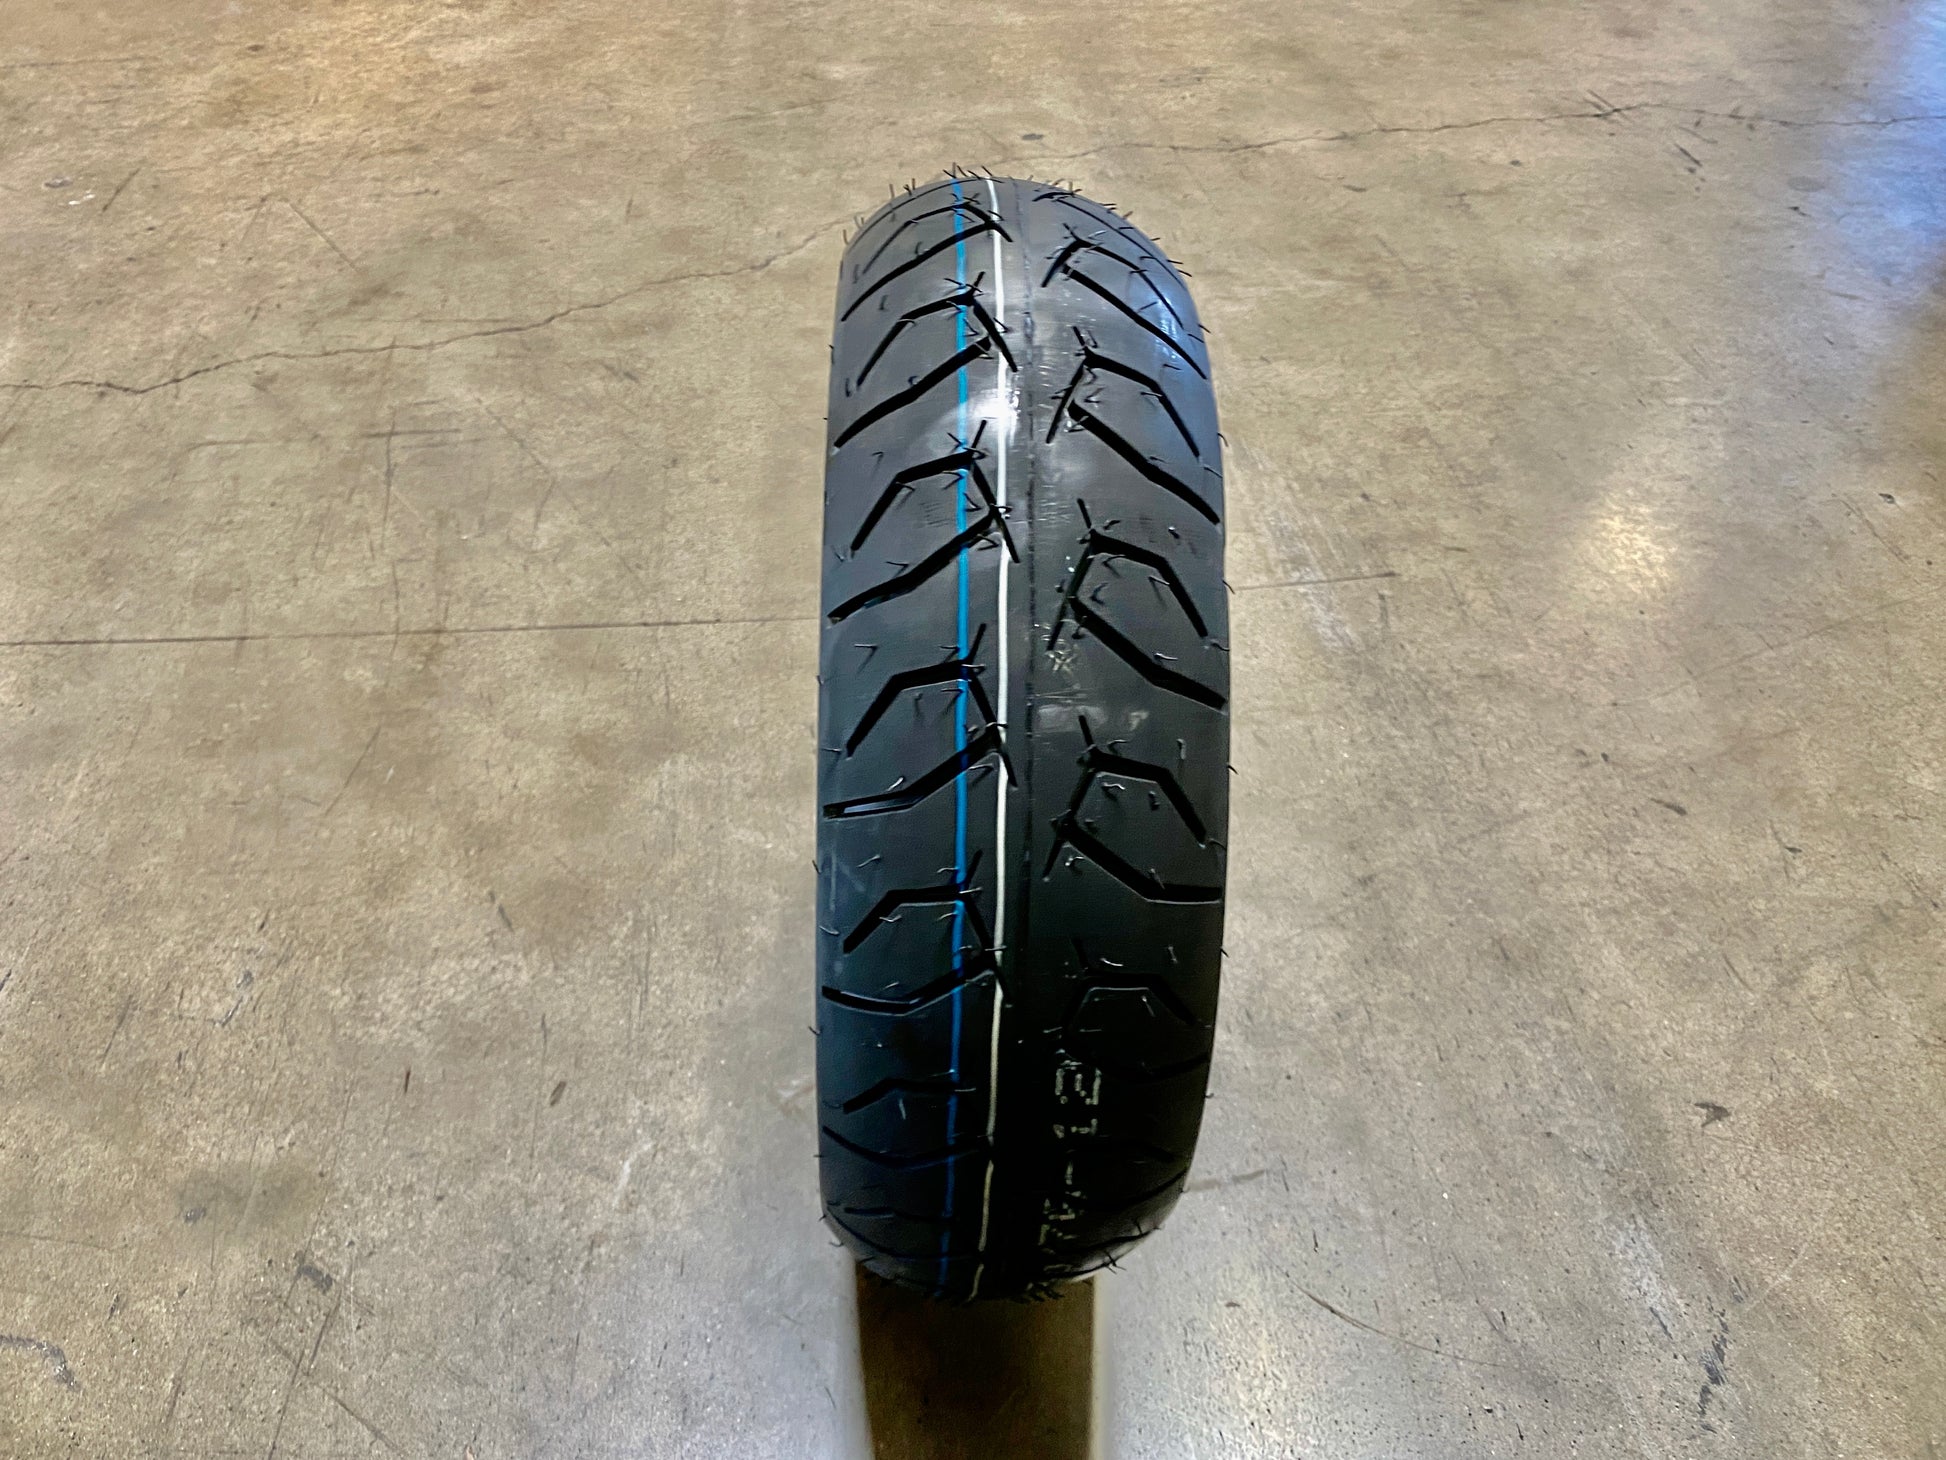 Tire 130/70-12 for sale Chinese grom clone